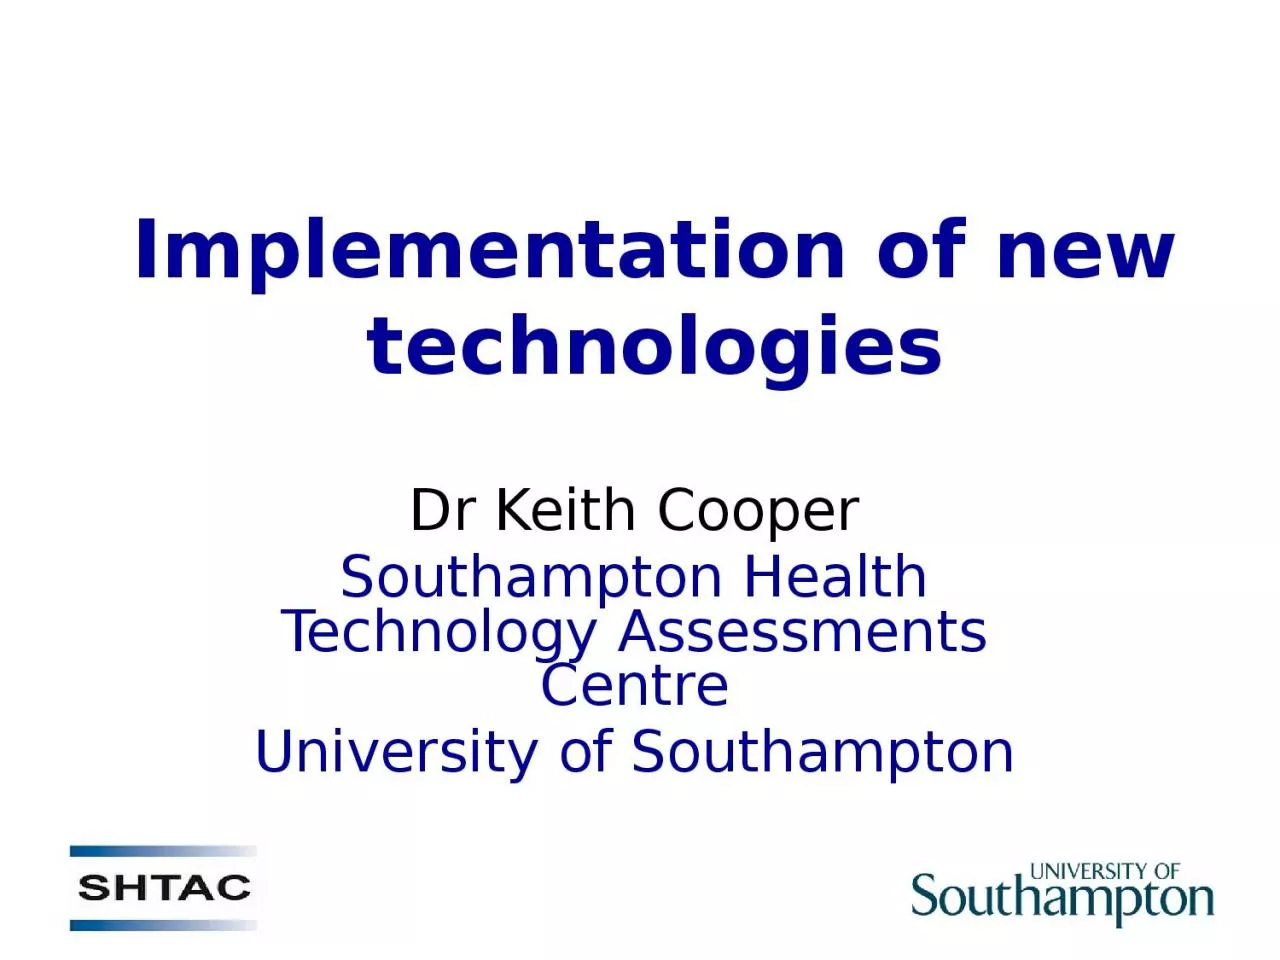 Implementation of new technologies